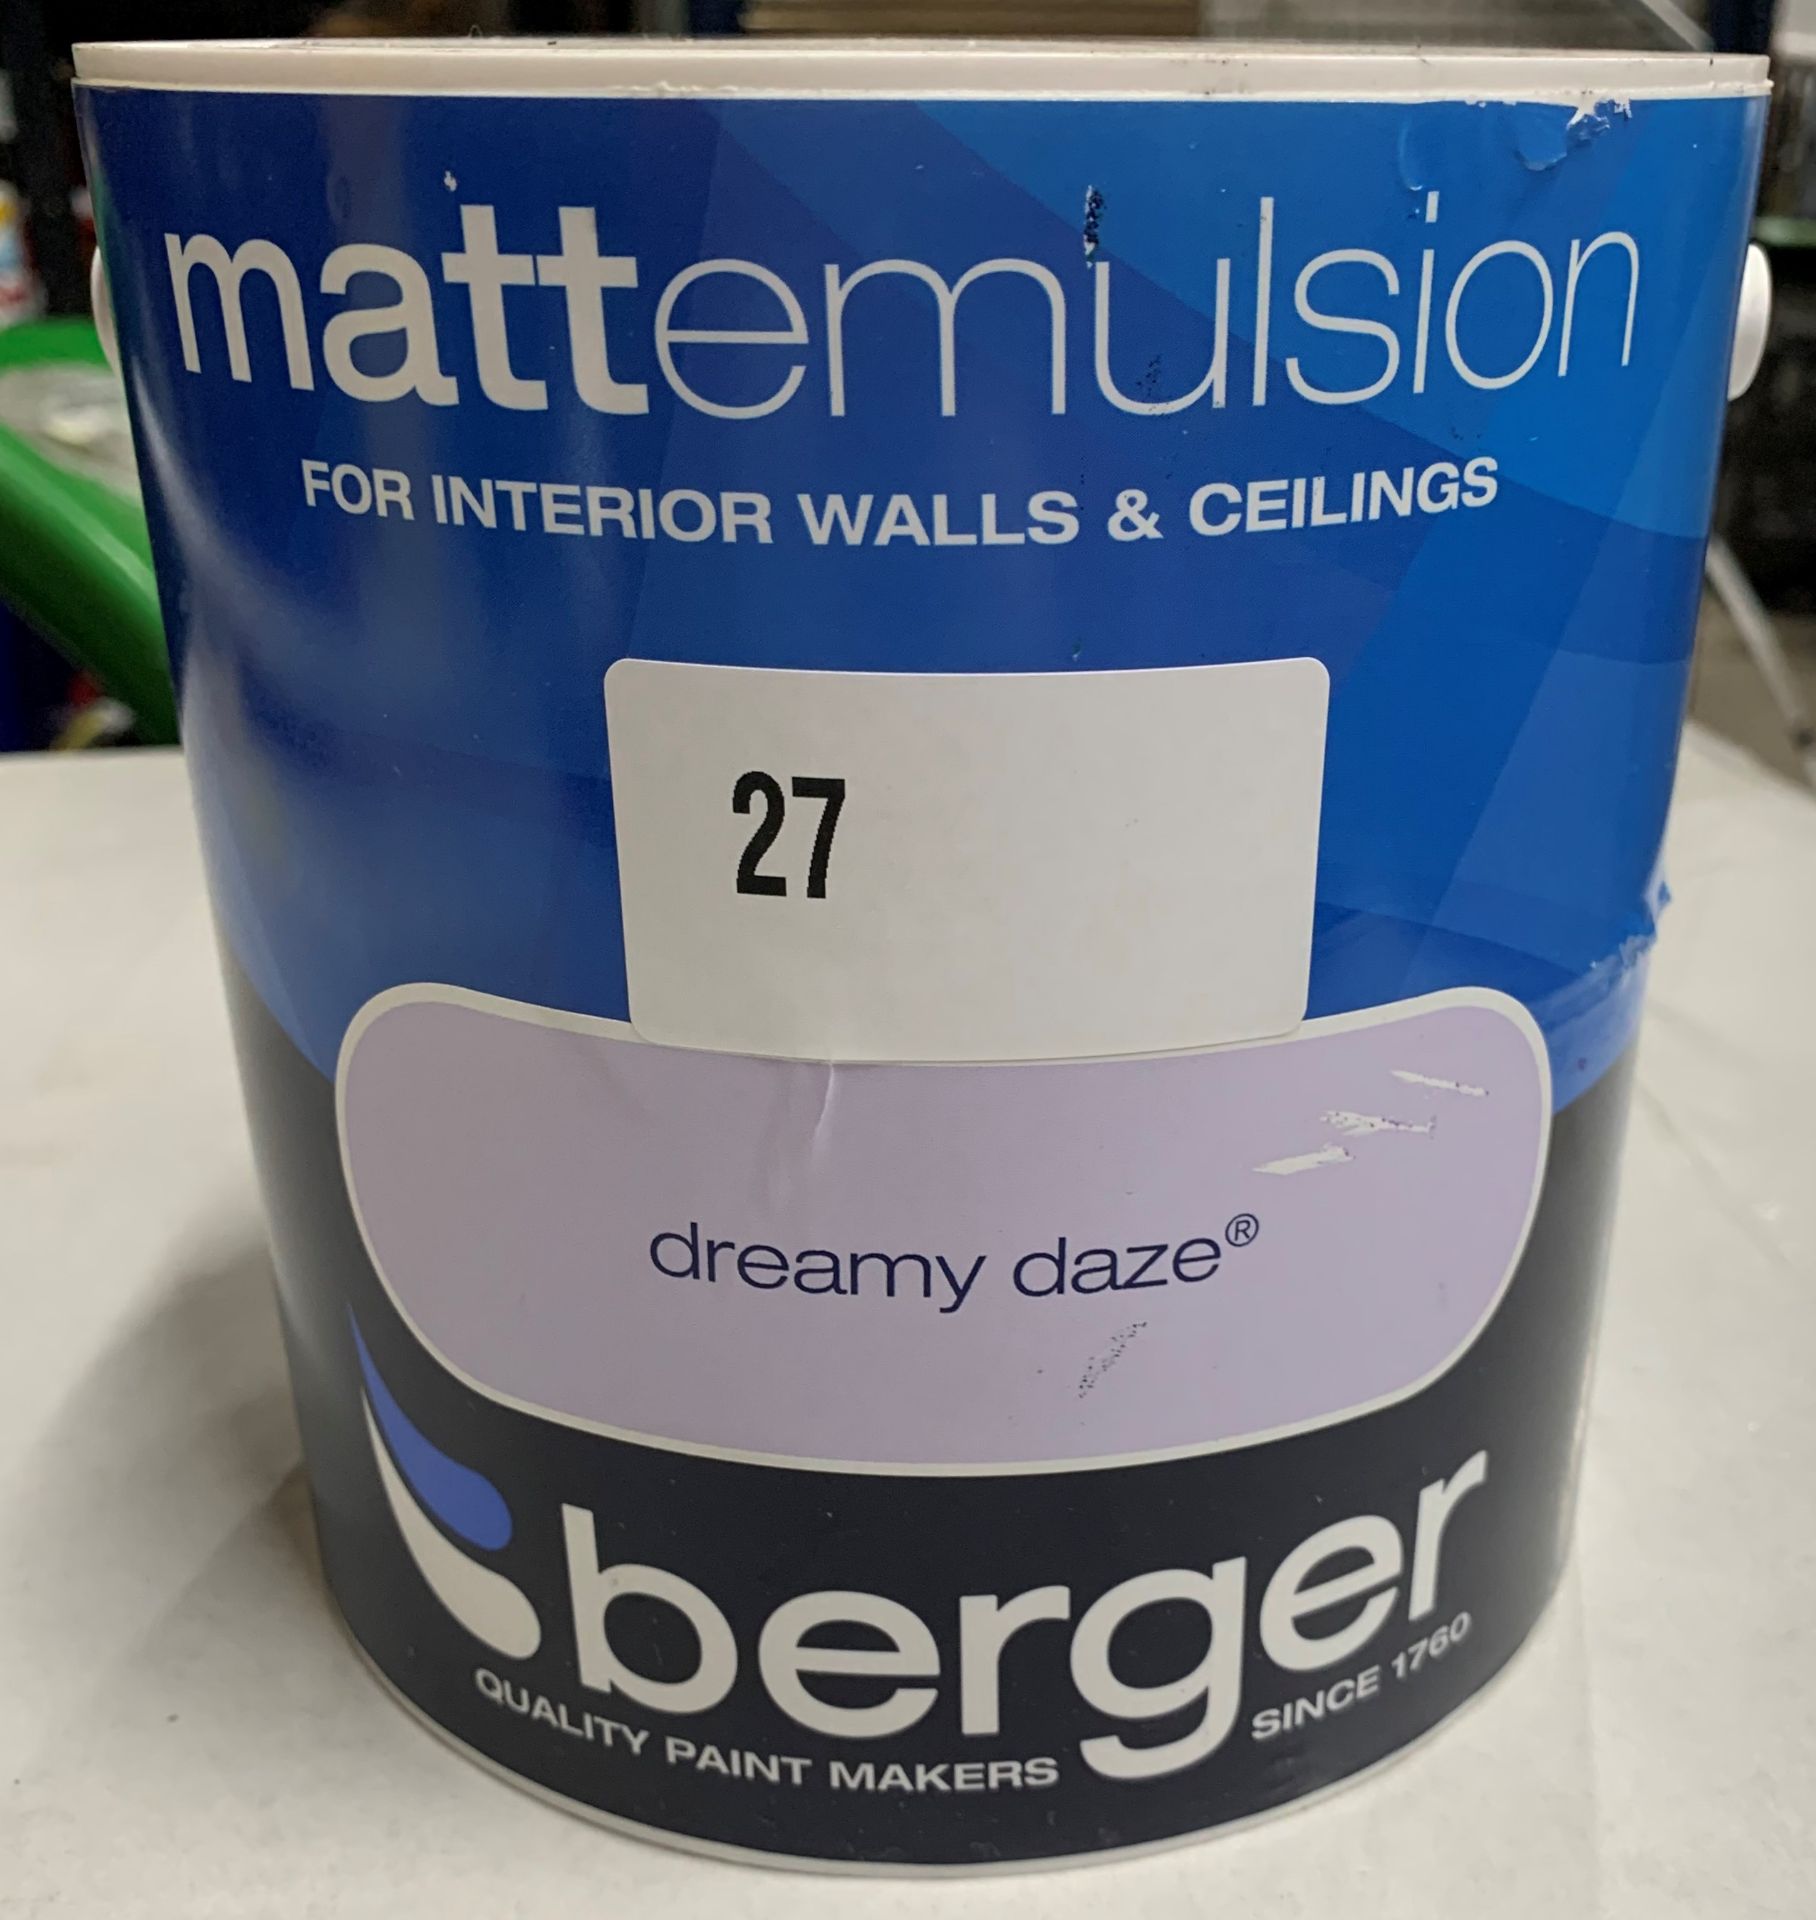 10 x 2.5 litre tubs of Berger mattemulsion various coloured paint's